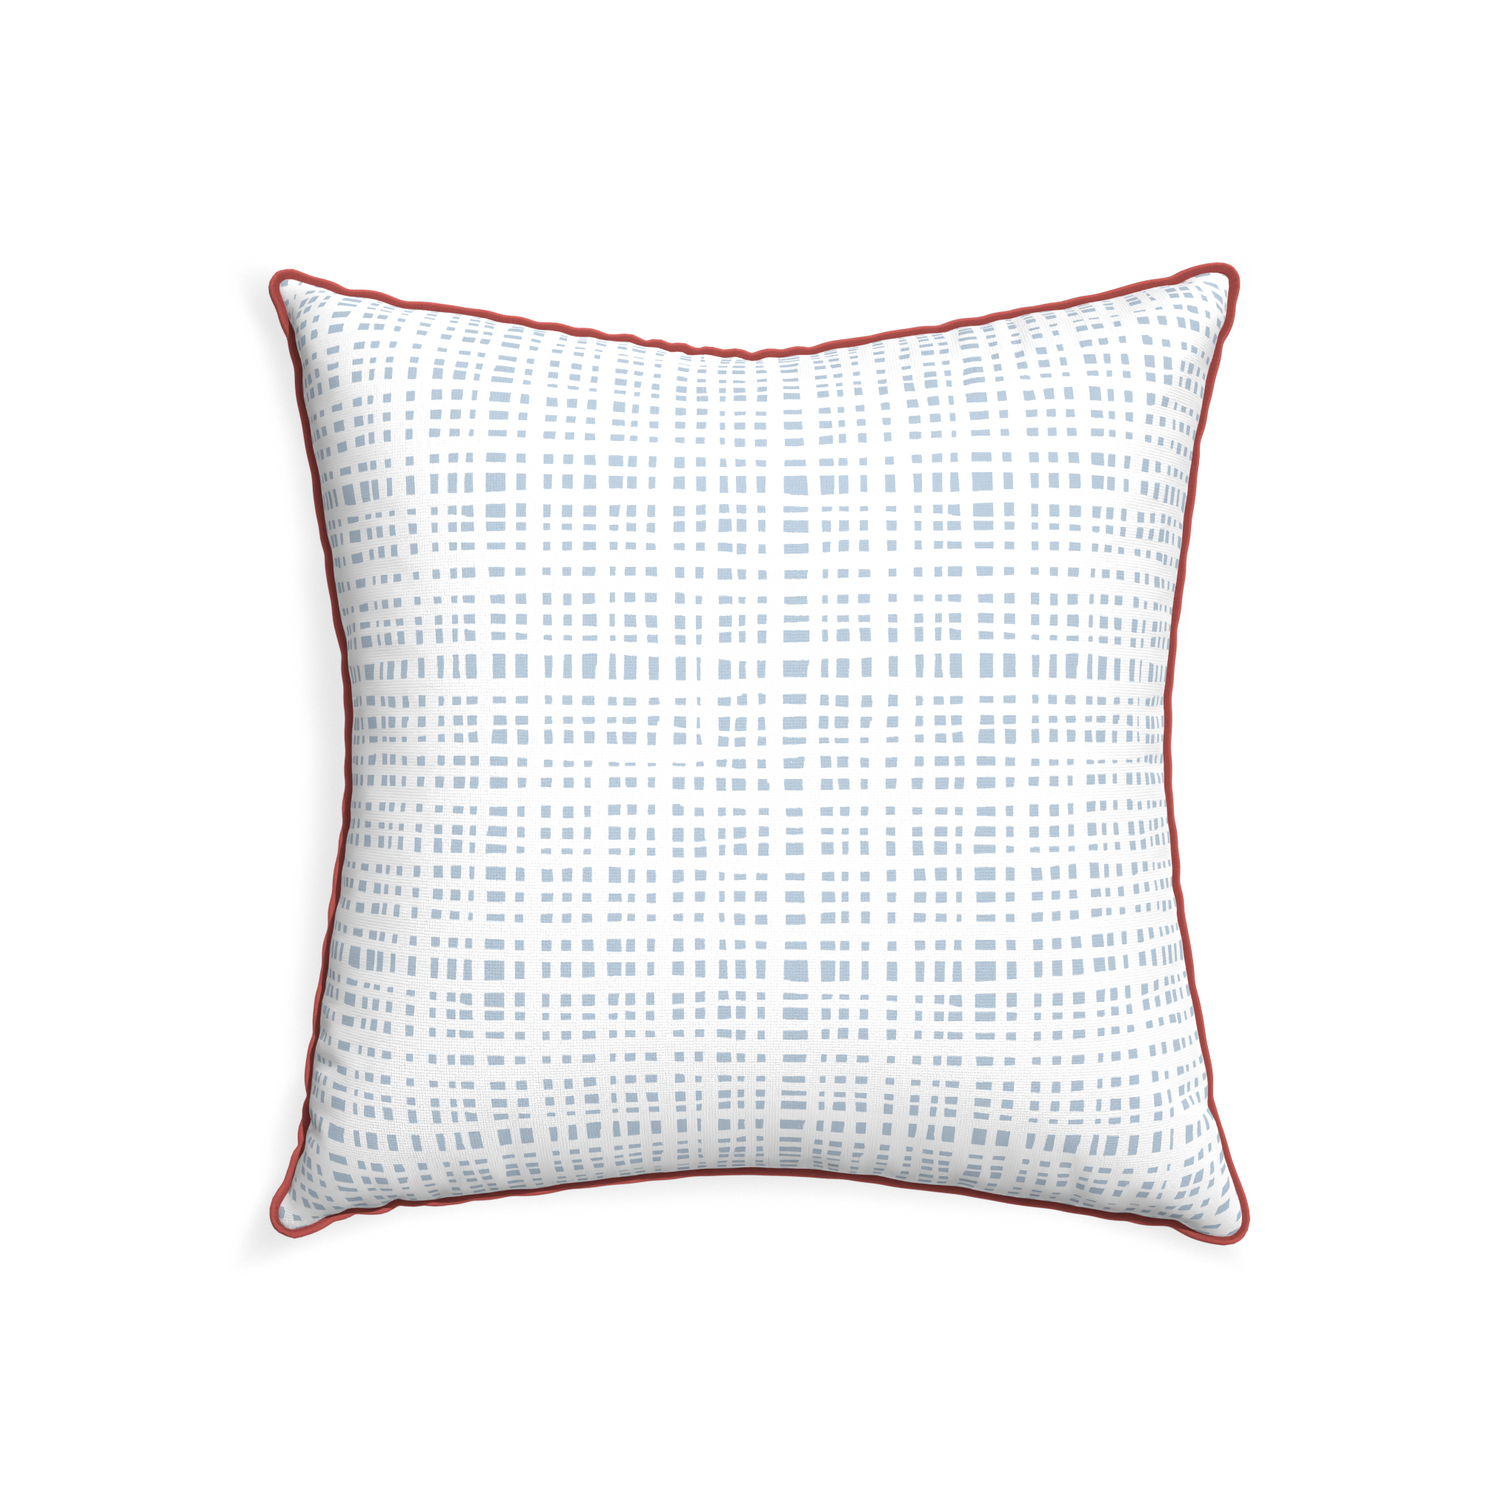 22-square ginger sky custom pillow with c piping on white background